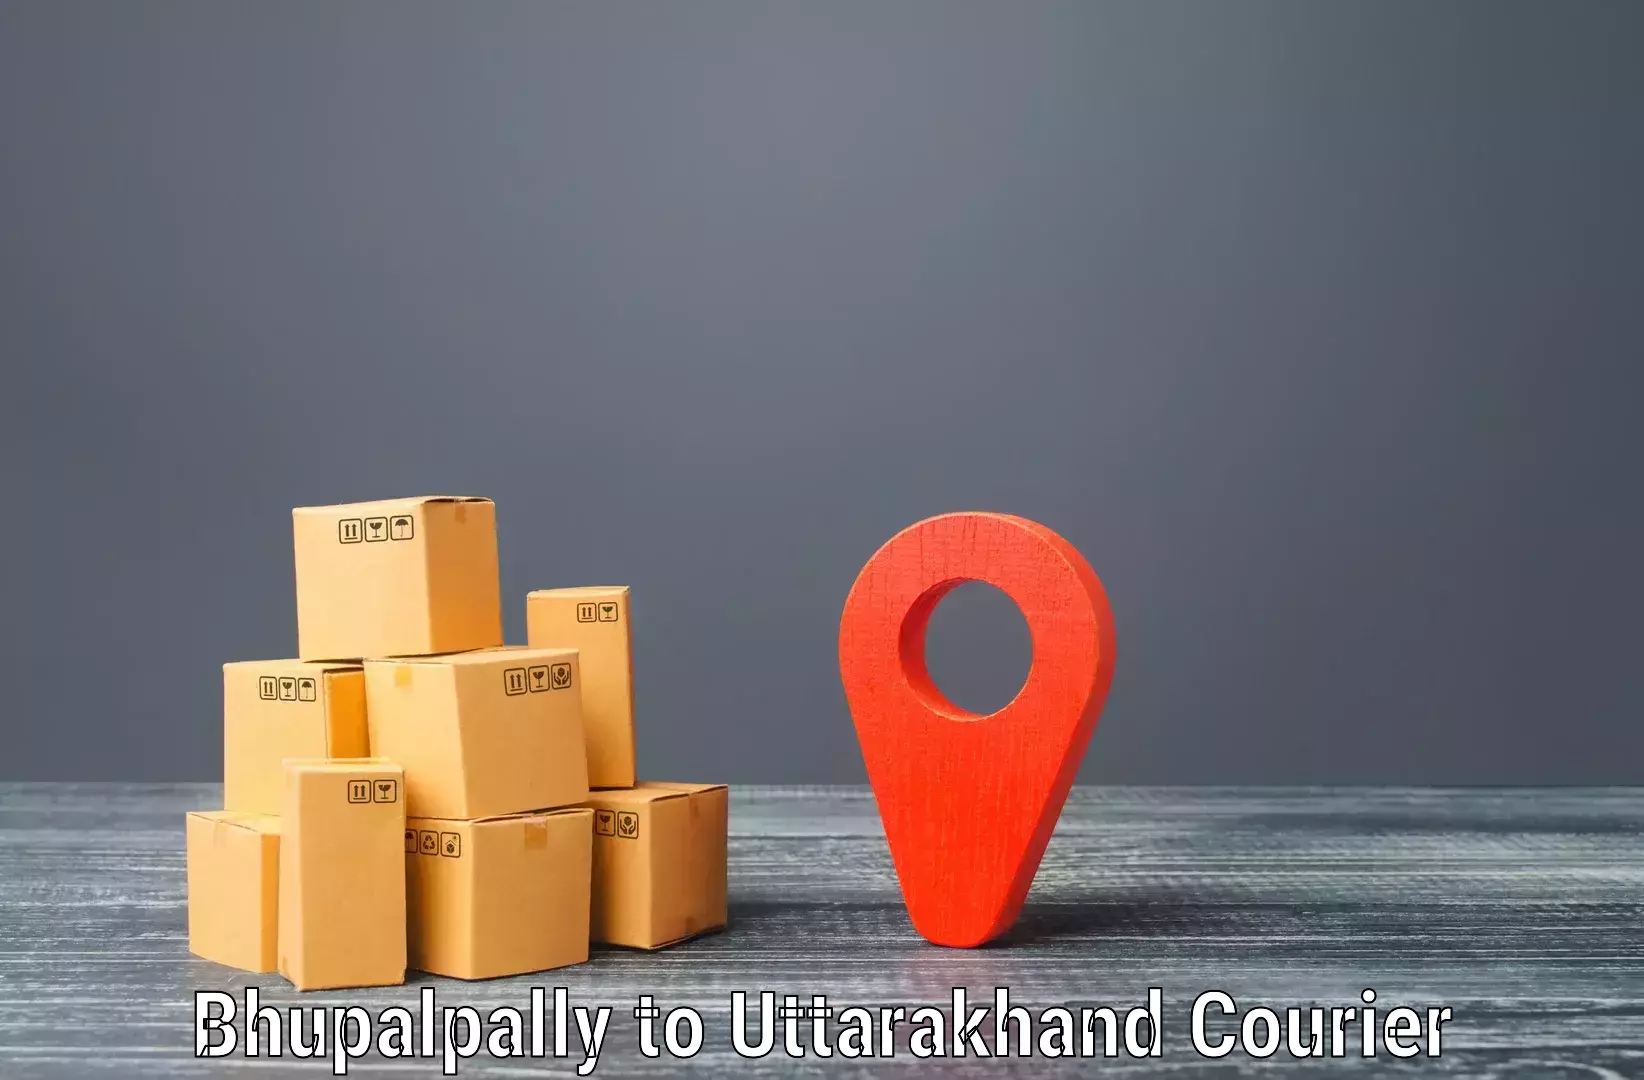 Overnight delivery services Bhupalpally to Bhagwanpur